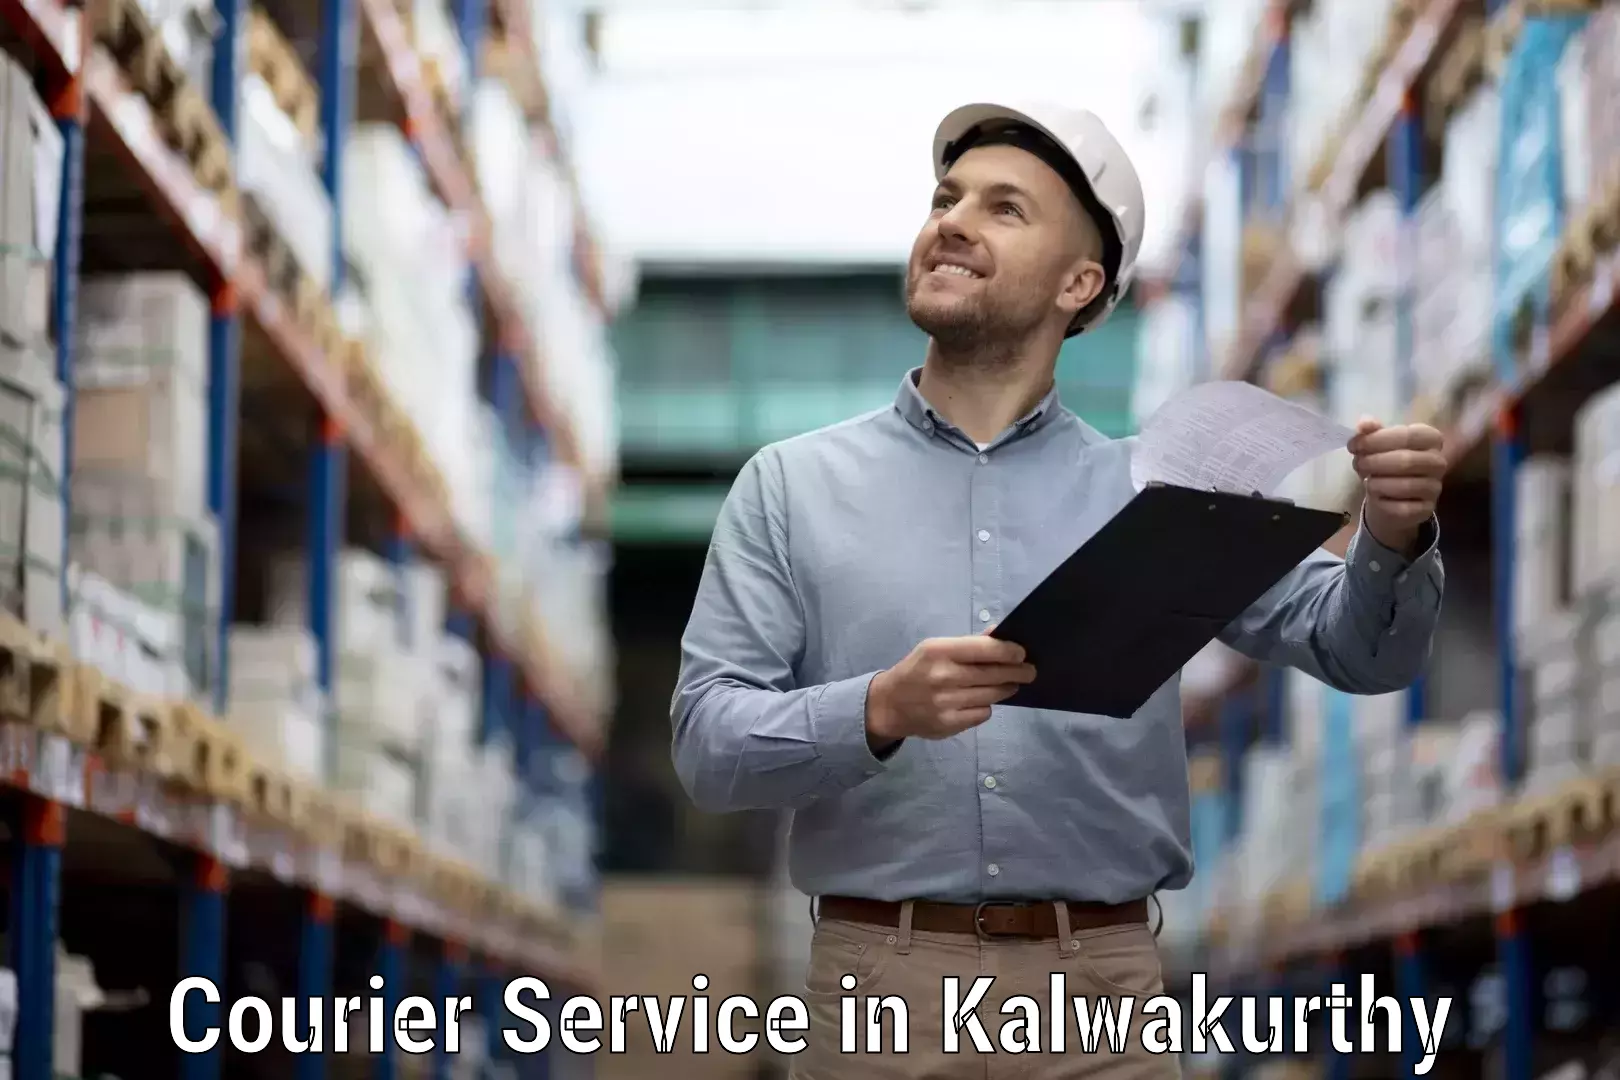 User-friendly delivery service in Kalwakurthy